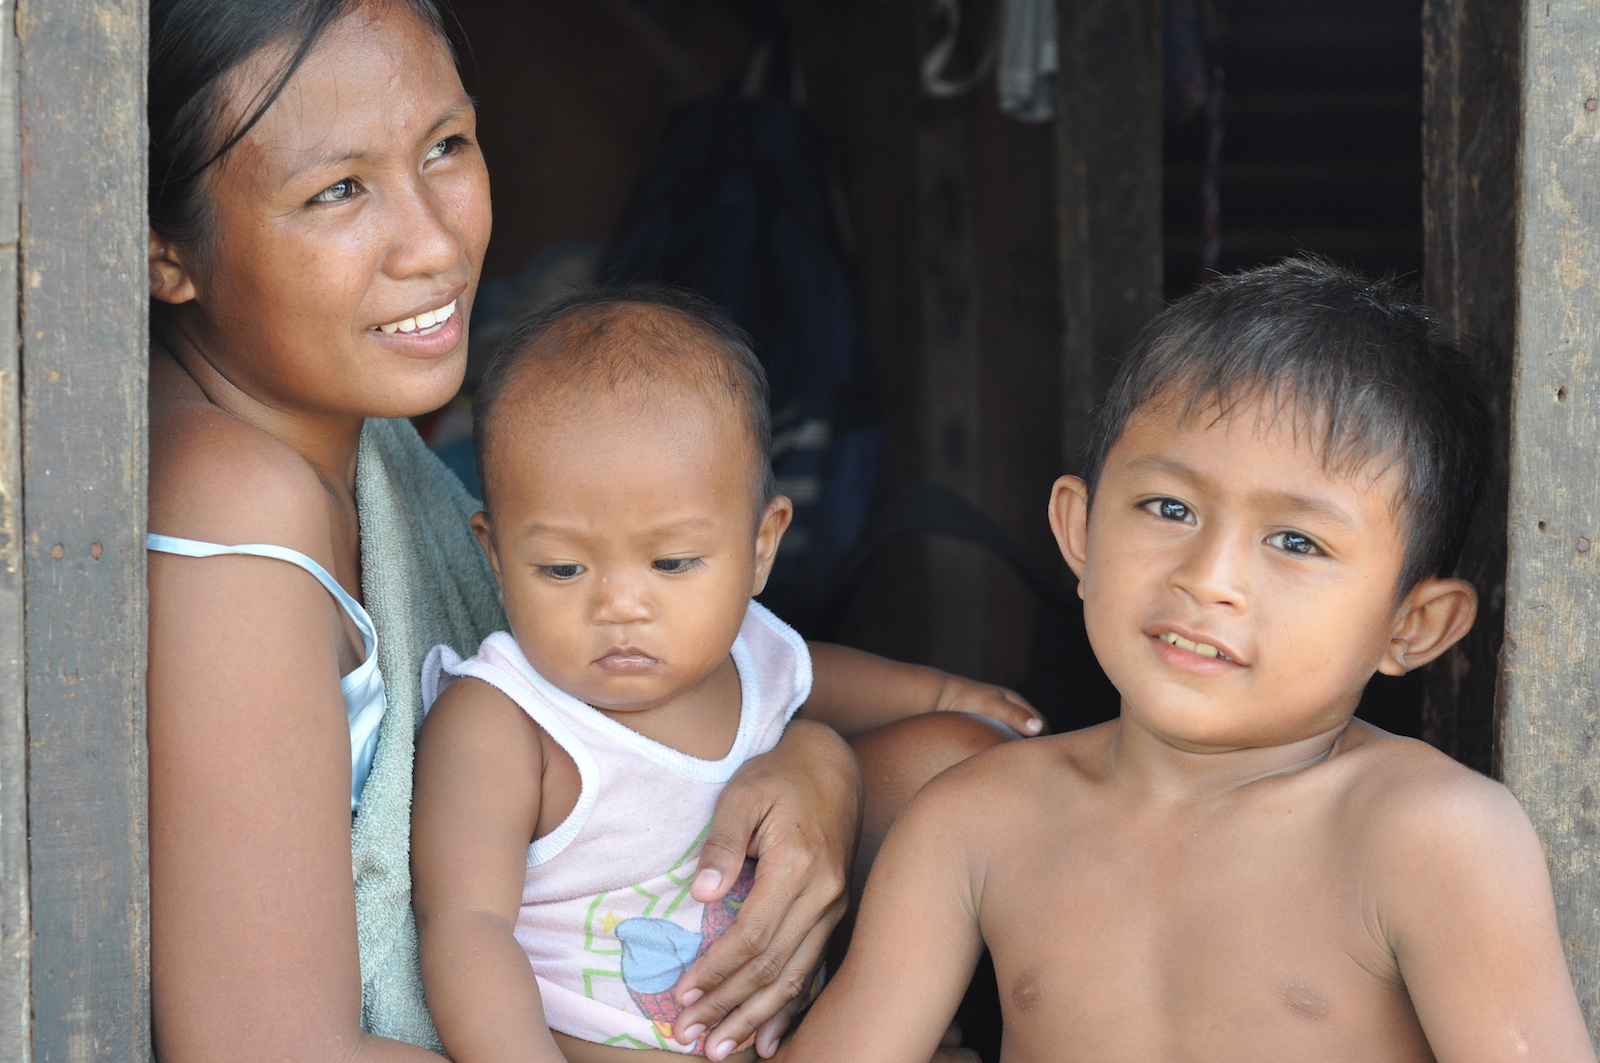 Gerald Alcaraz (right) sits in the doorway of the small family home in Tacloban, Philippines with his mother Richelle and his younger brother Jeffrey